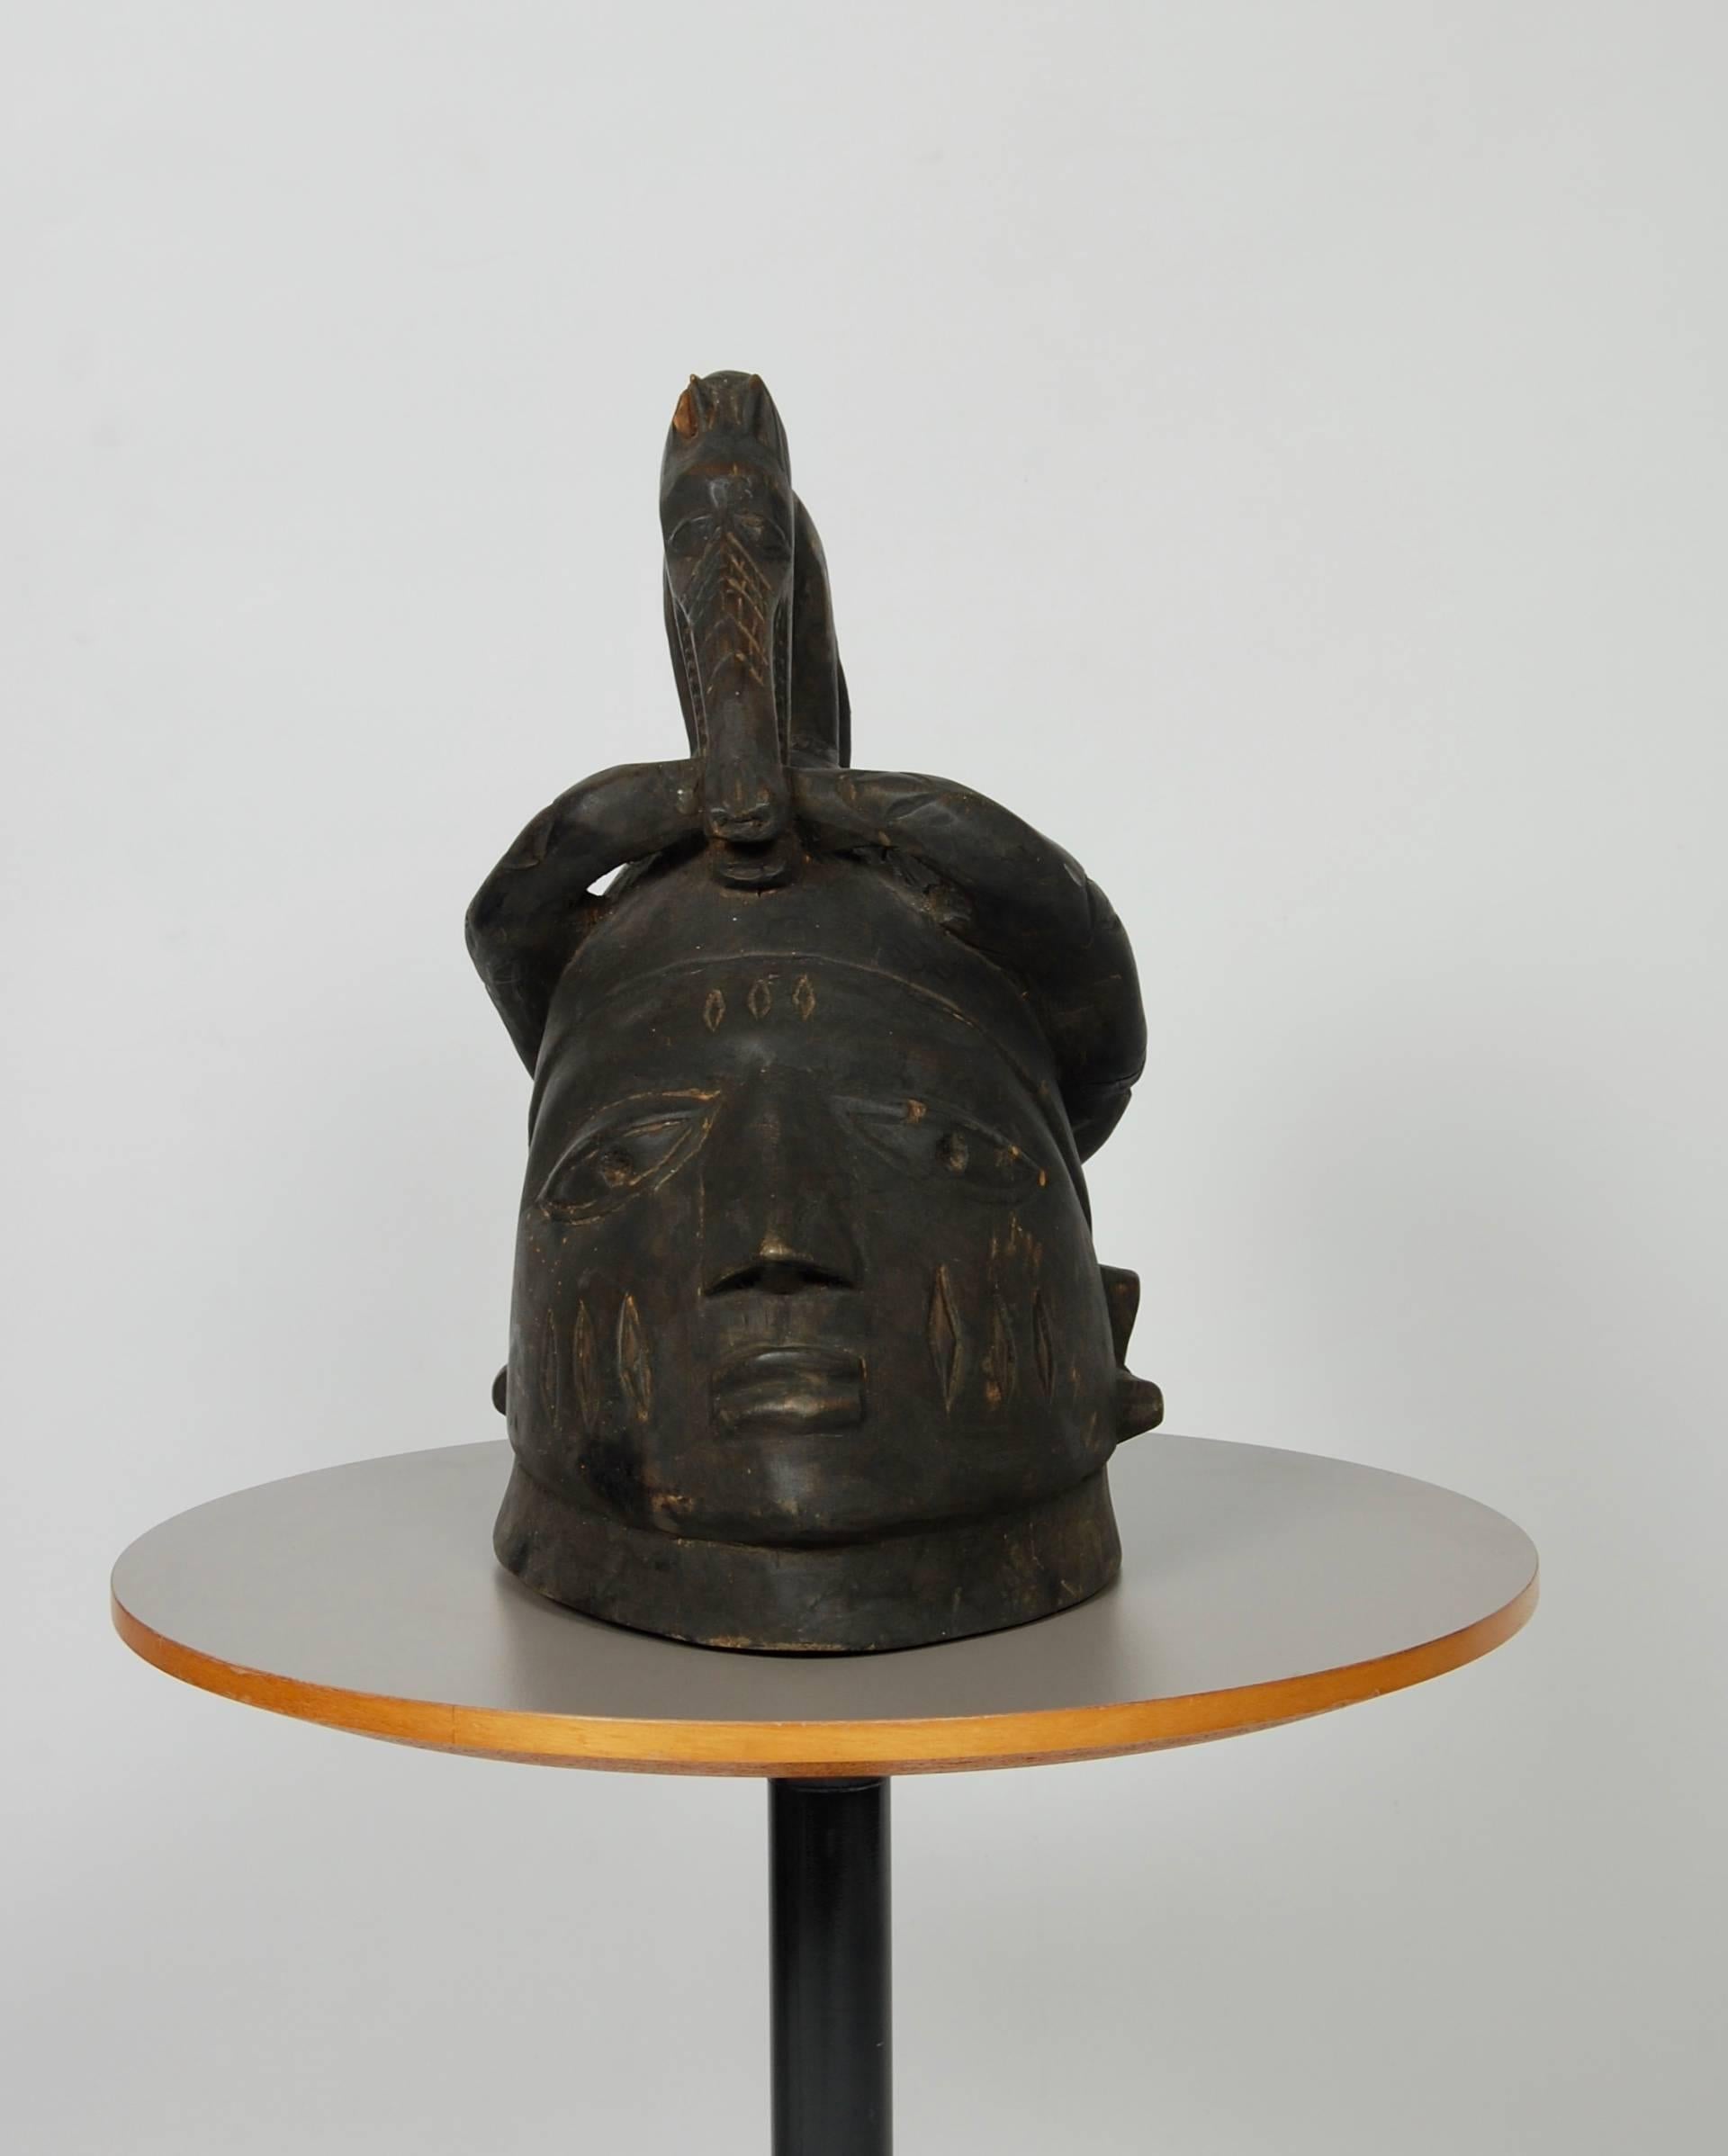 Blacked wood helmet mask (Gelede), large human head surmounted by a dog eating a snake which curves around the head. No perforation for attachment to costume from Yoruba, Nigeria. Purchased in 1982 at James R Lawson Pty. Limited, Sydney, Australia